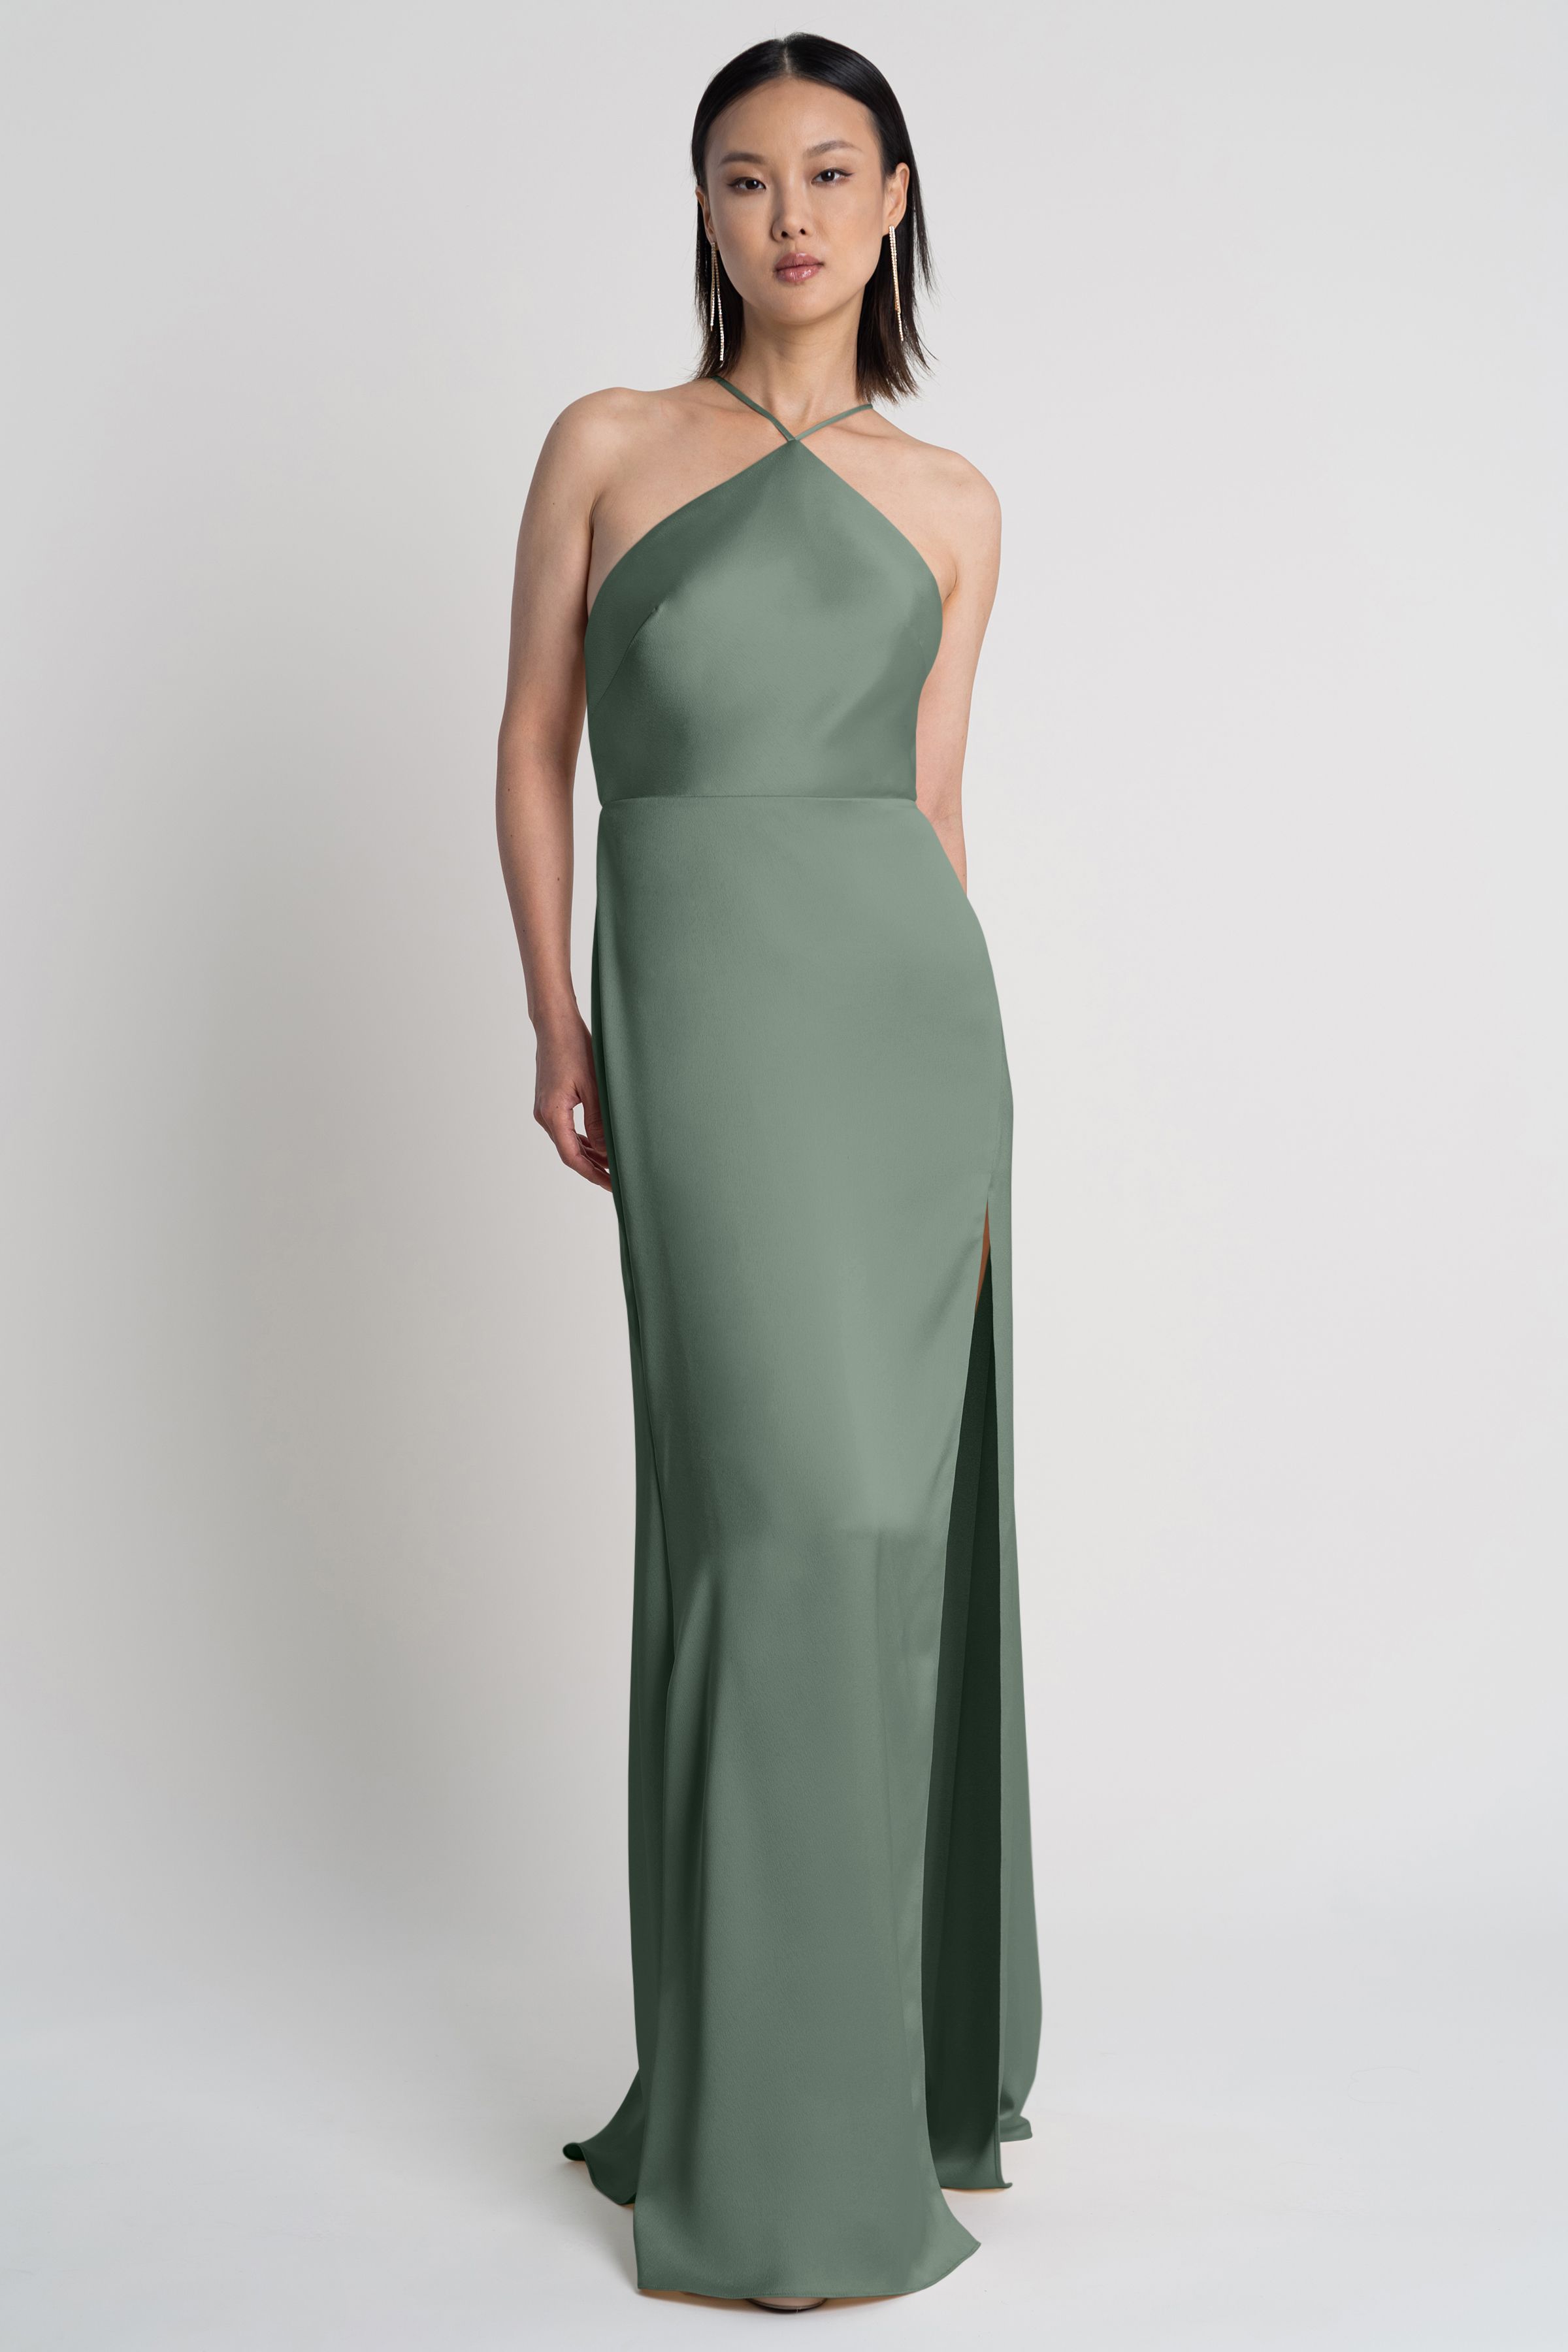 Emerald Green Formal Gown  Dress for a Black Tie Wedding